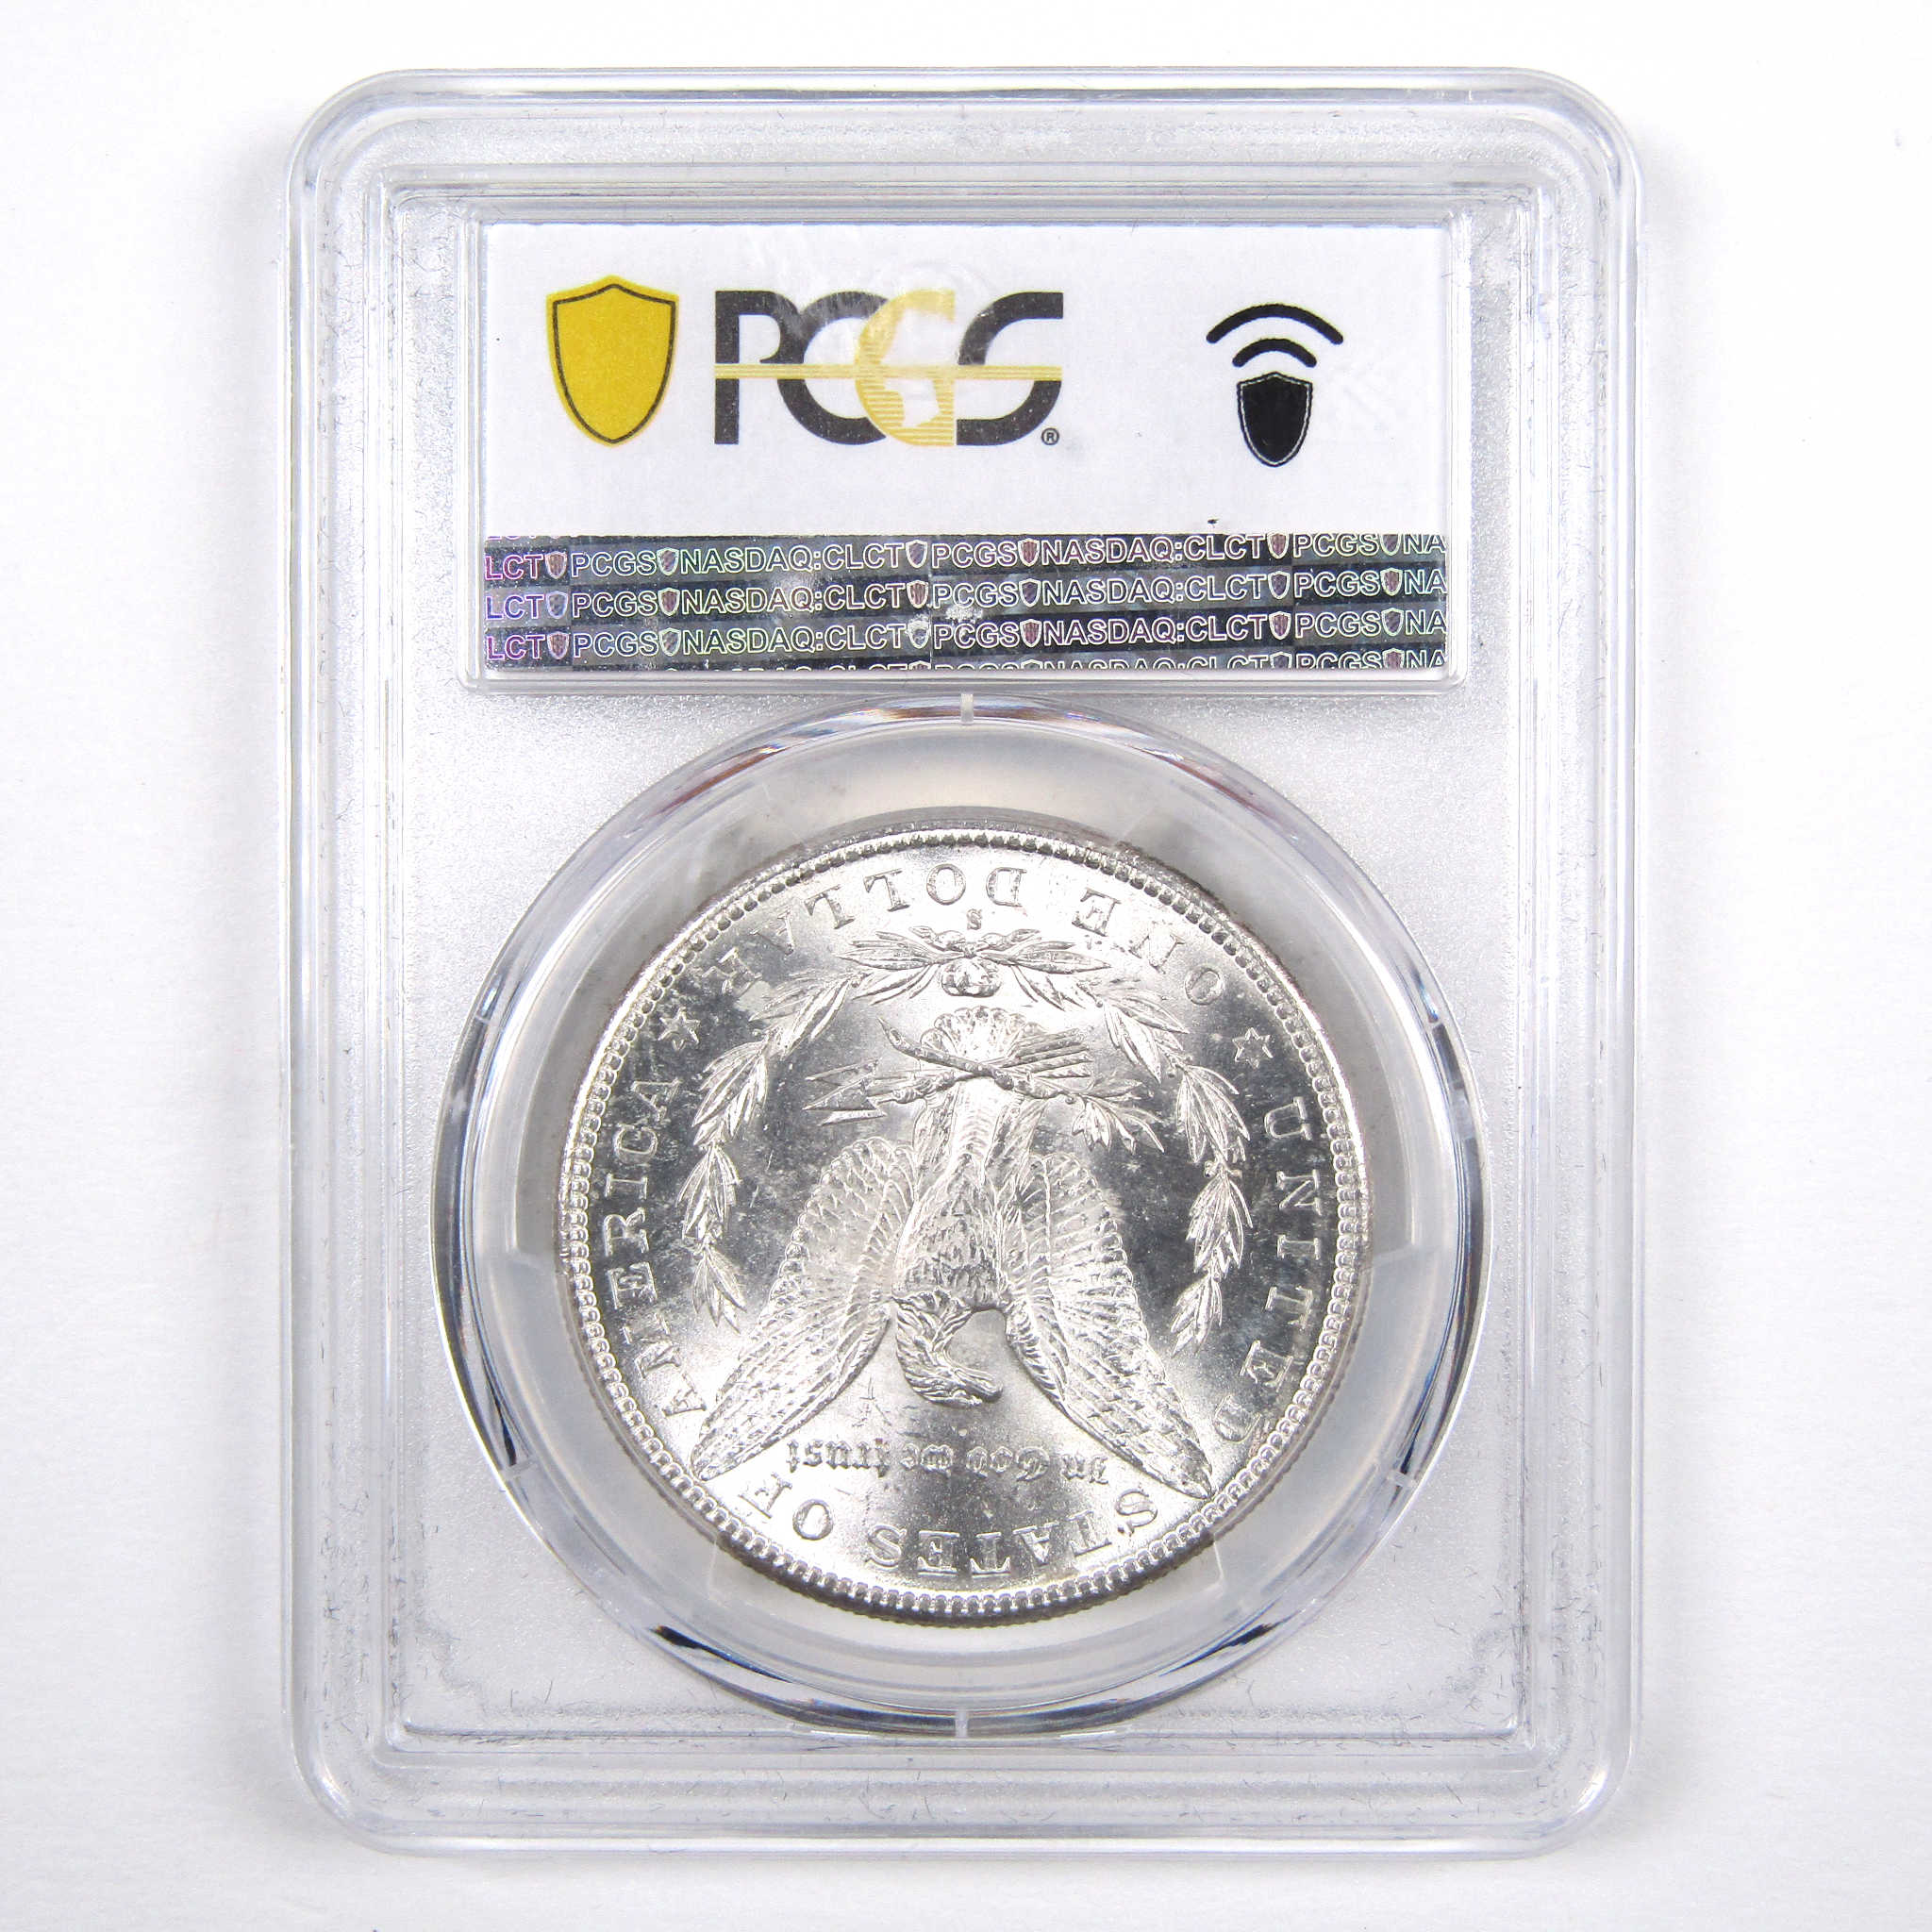 1885 S Morgan Dollar MS 63 PCGS 90% Silver Uncirculated SKU:I3046 - Morgan coin - Morgan silver dollar - Morgan silver dollar for sale - Profile Coins &amp; Collectibles